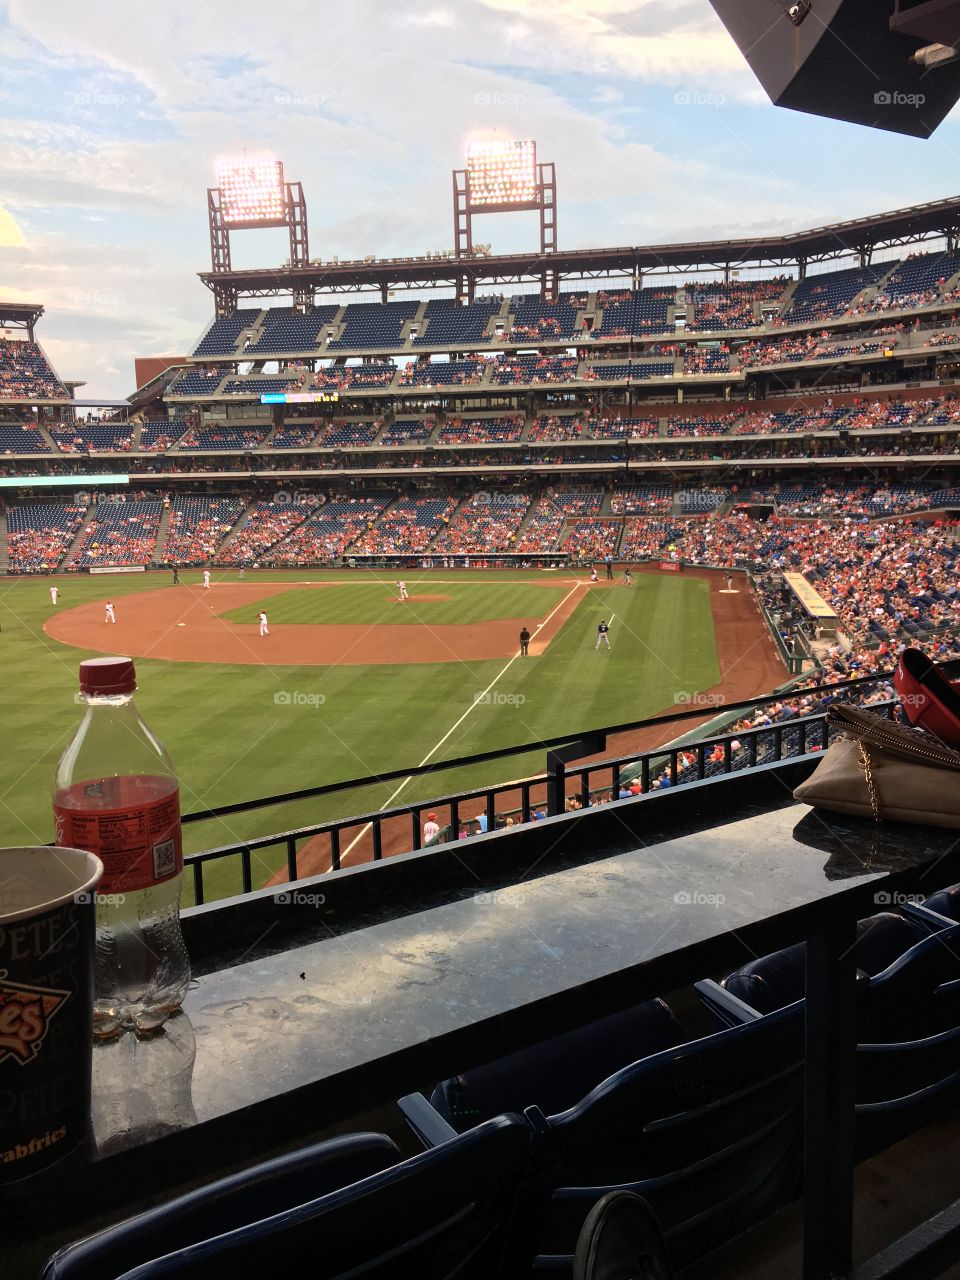 Phillies game, baseball, suite seats